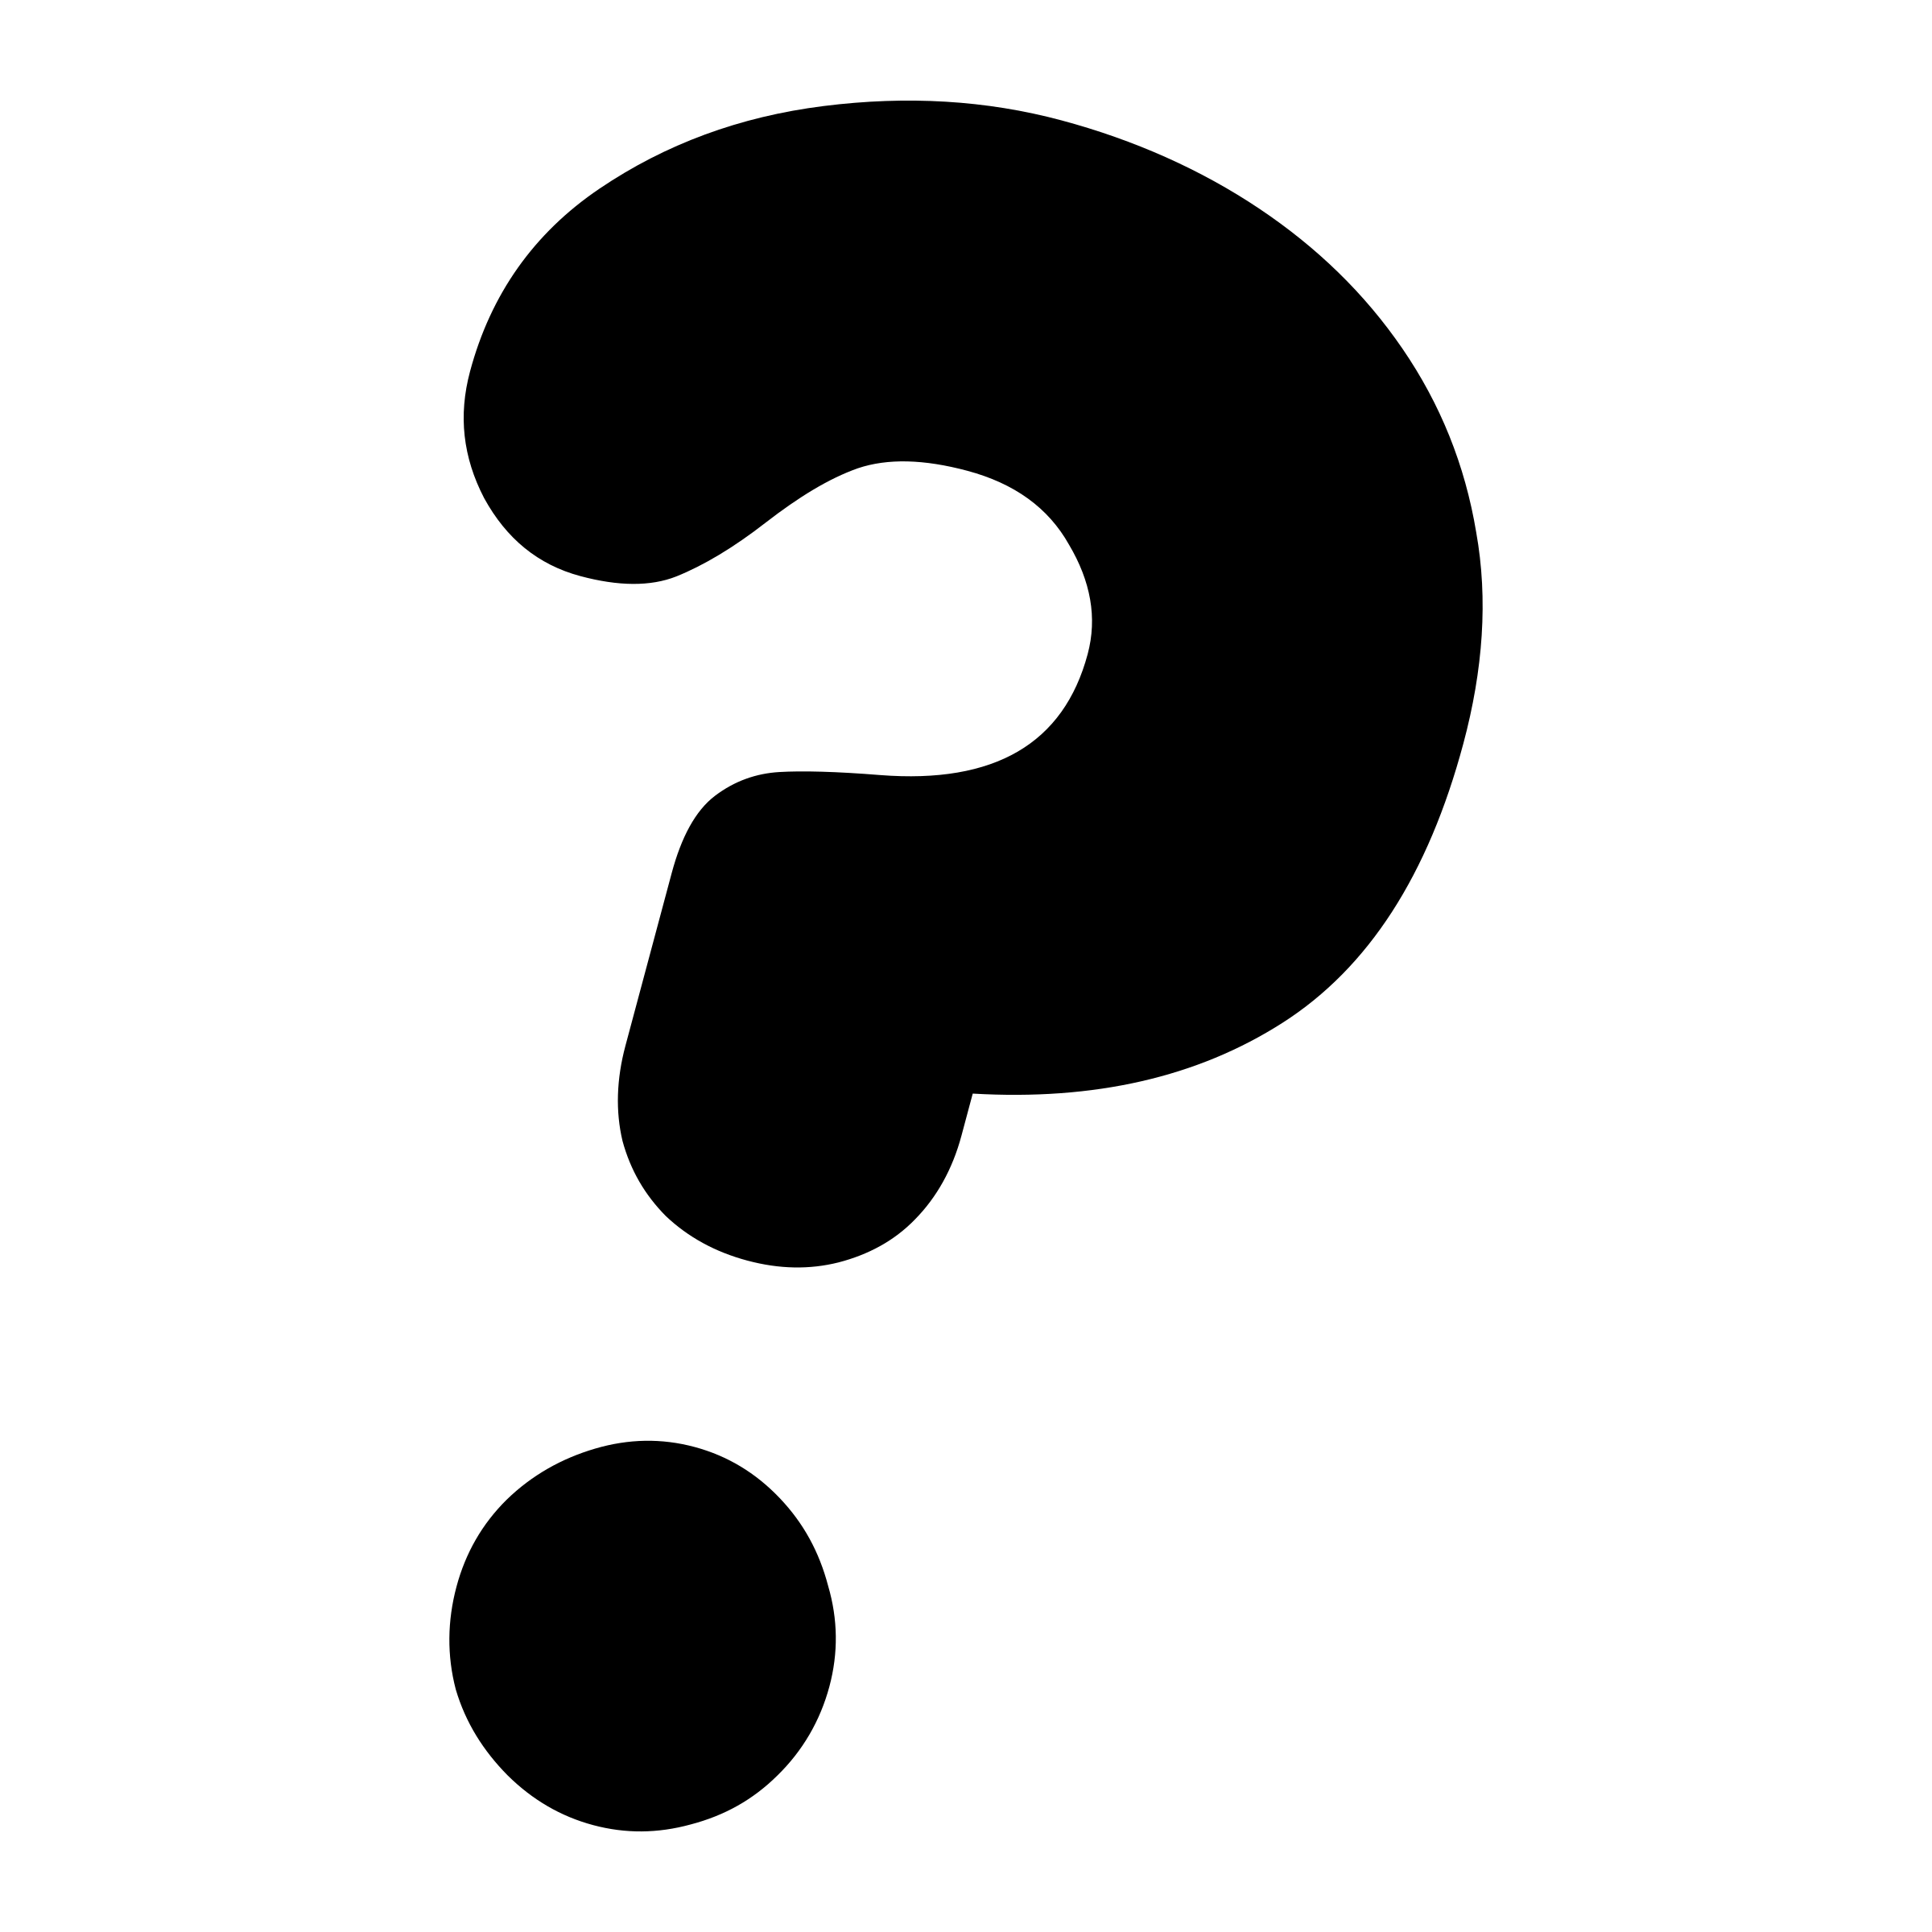 microsoft office clipart question mark - photo #6